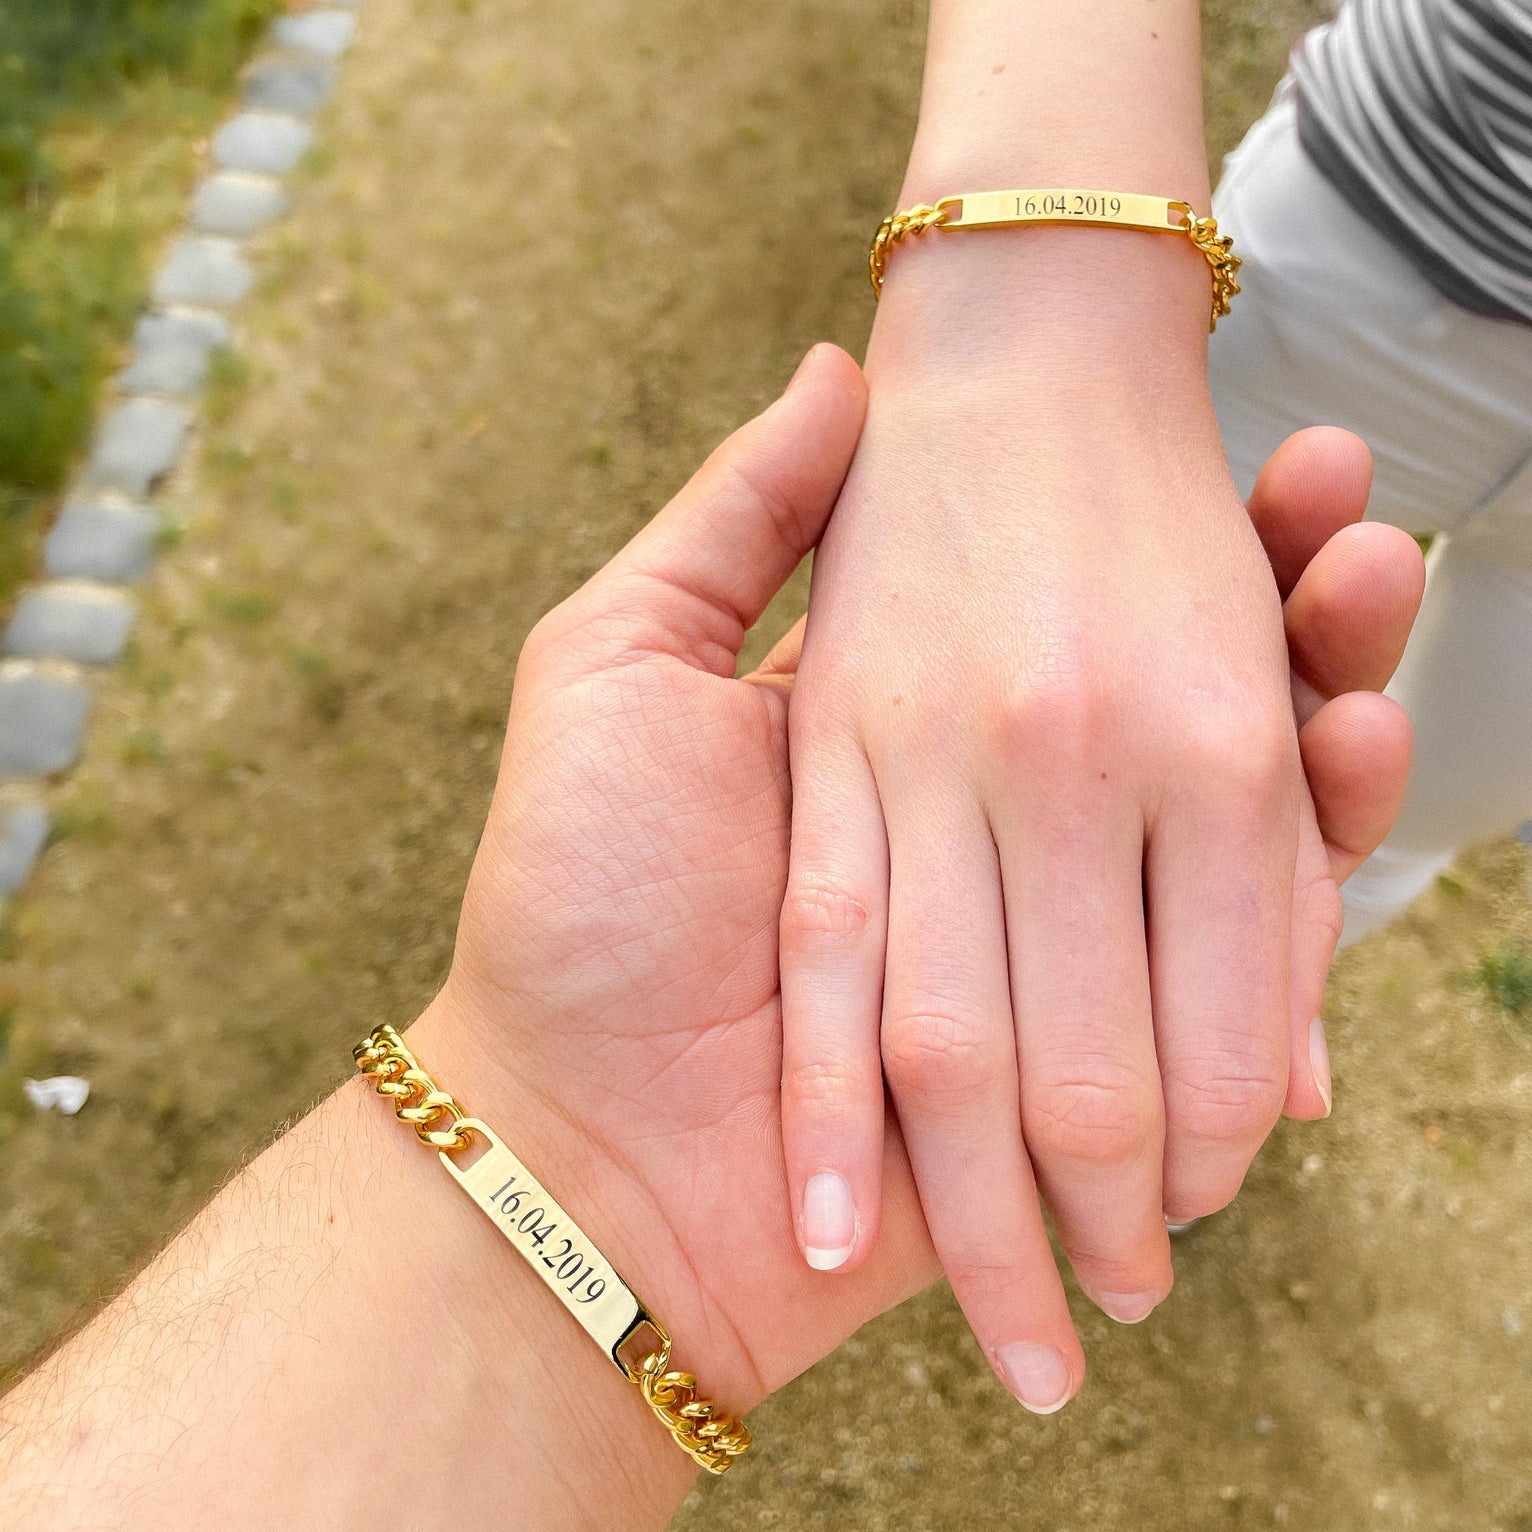 Buy Couple Bracelet Gold Online In India India, 50% OFF